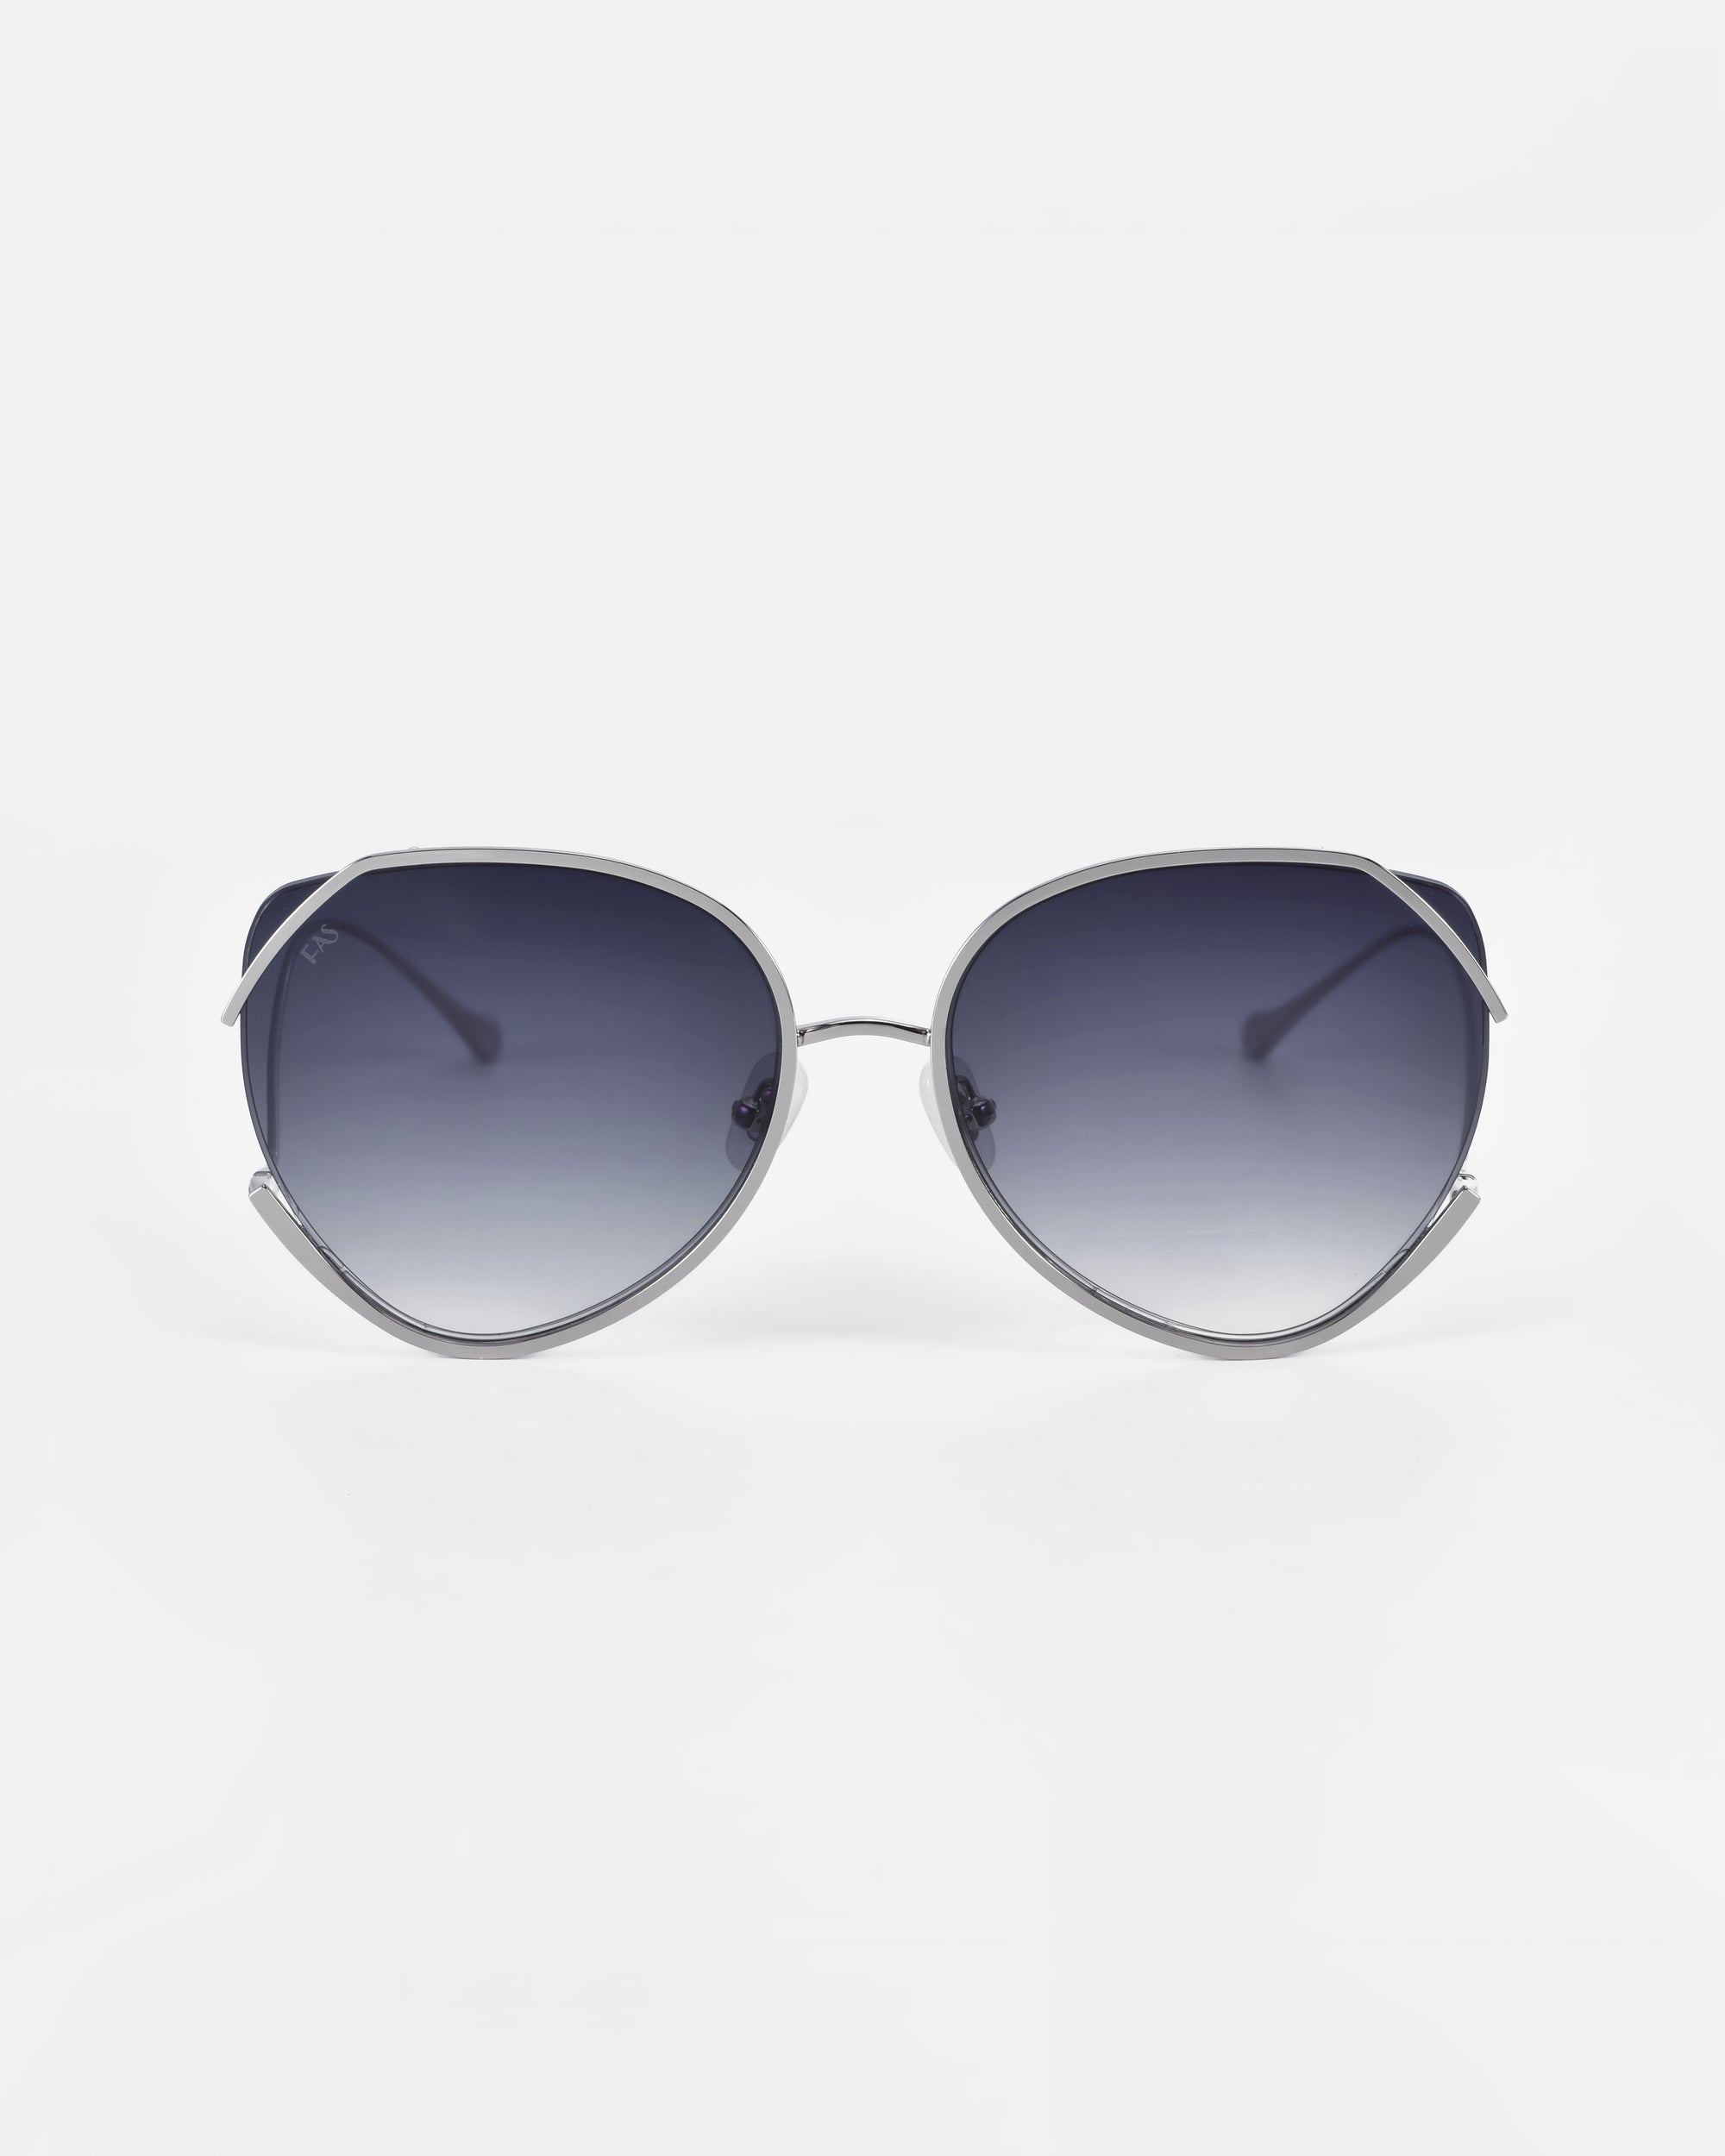 A pair of oversized, cat-eye sunglasses with thin metal frames and ultralightweight gradient lenses that provide 100% UV protection. The frames are sleek and metallic, complemented by jadestone nose pads for added comfort. The overall aesthetic is modern and chic. Introducing Wonderland by For Art&#39;s Sake®.